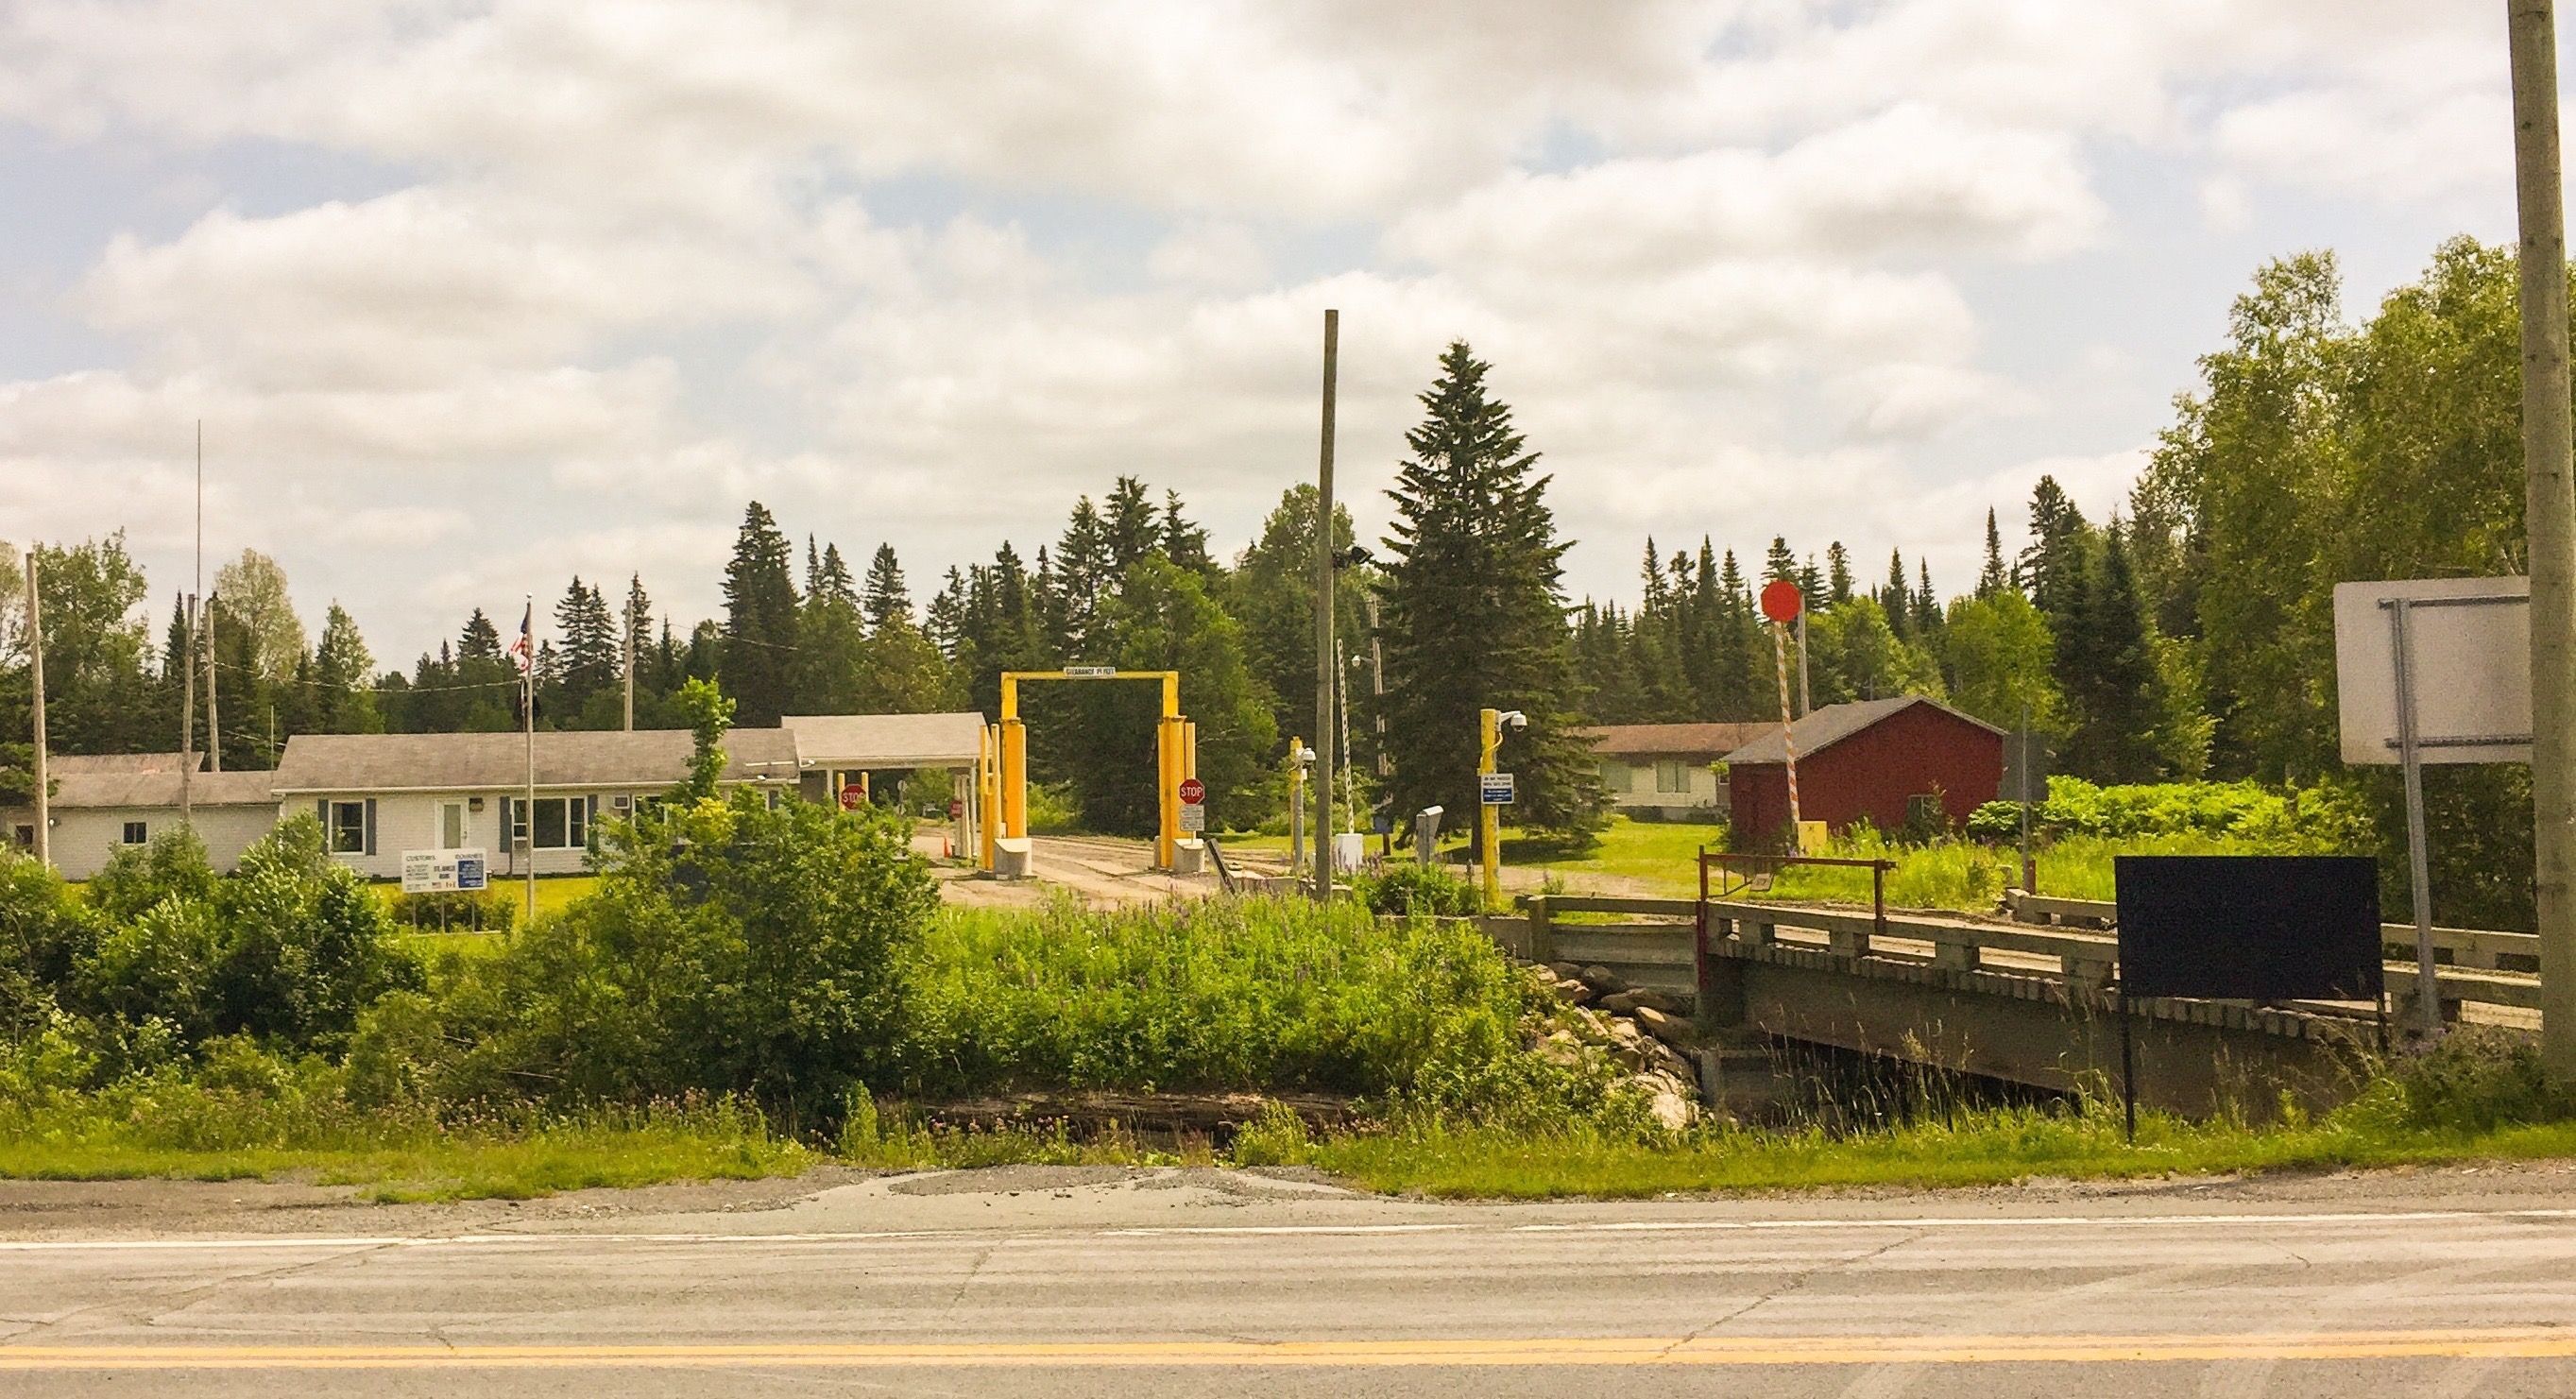 The Maine / Quebec border in "la Beauce". Basically a logging road.